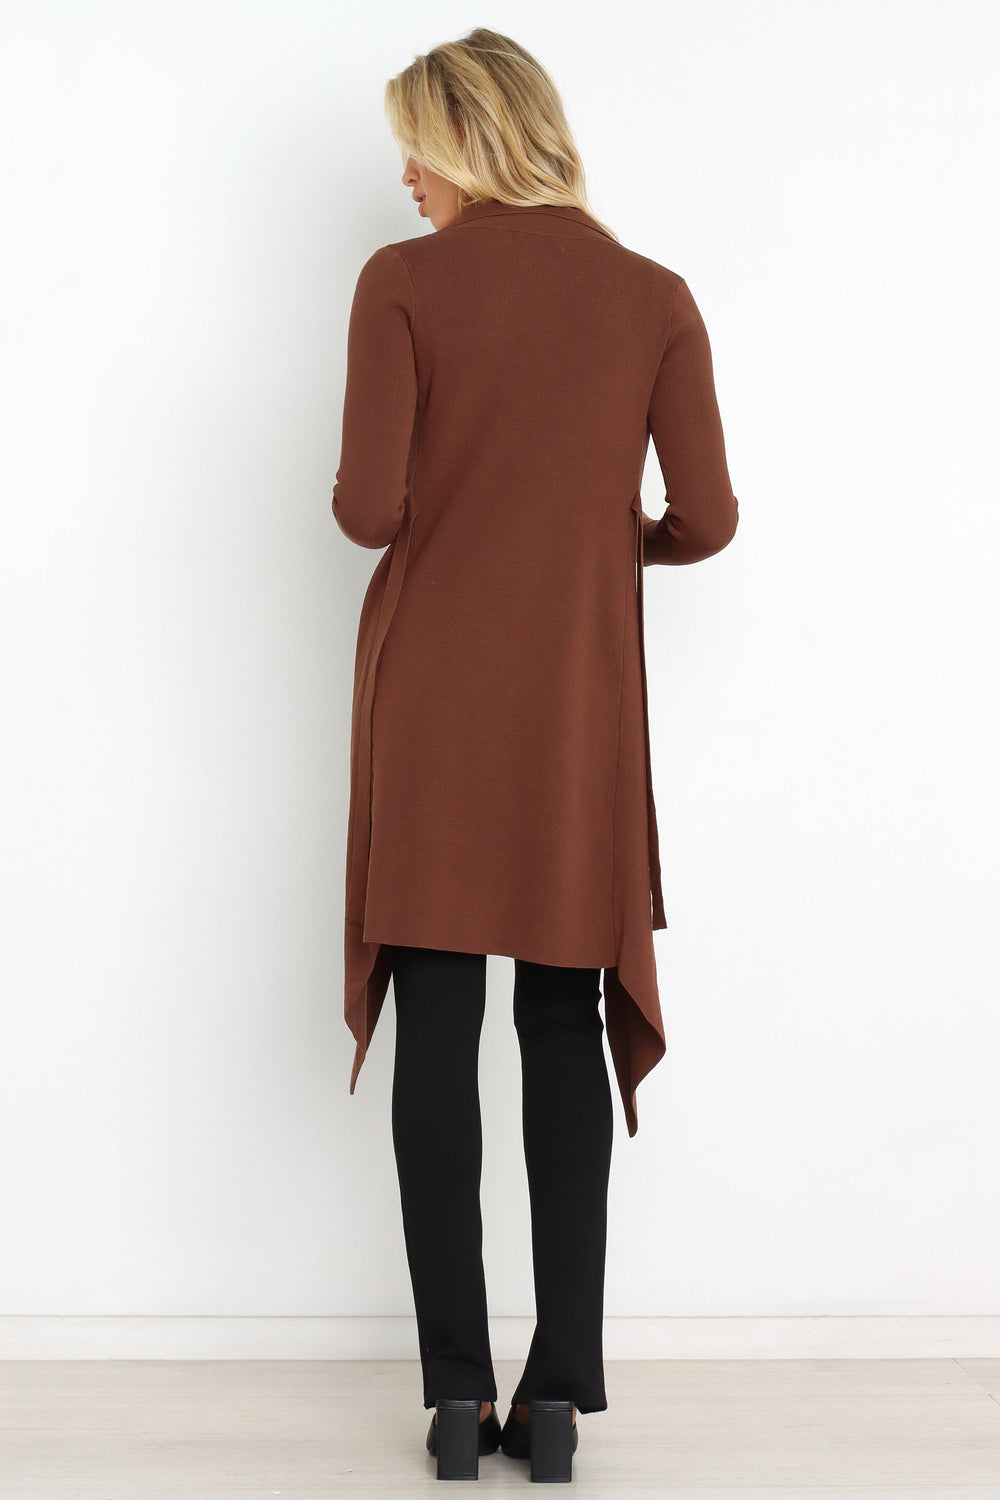 OUTERWEAR Tracey Cardigan - Chocolate